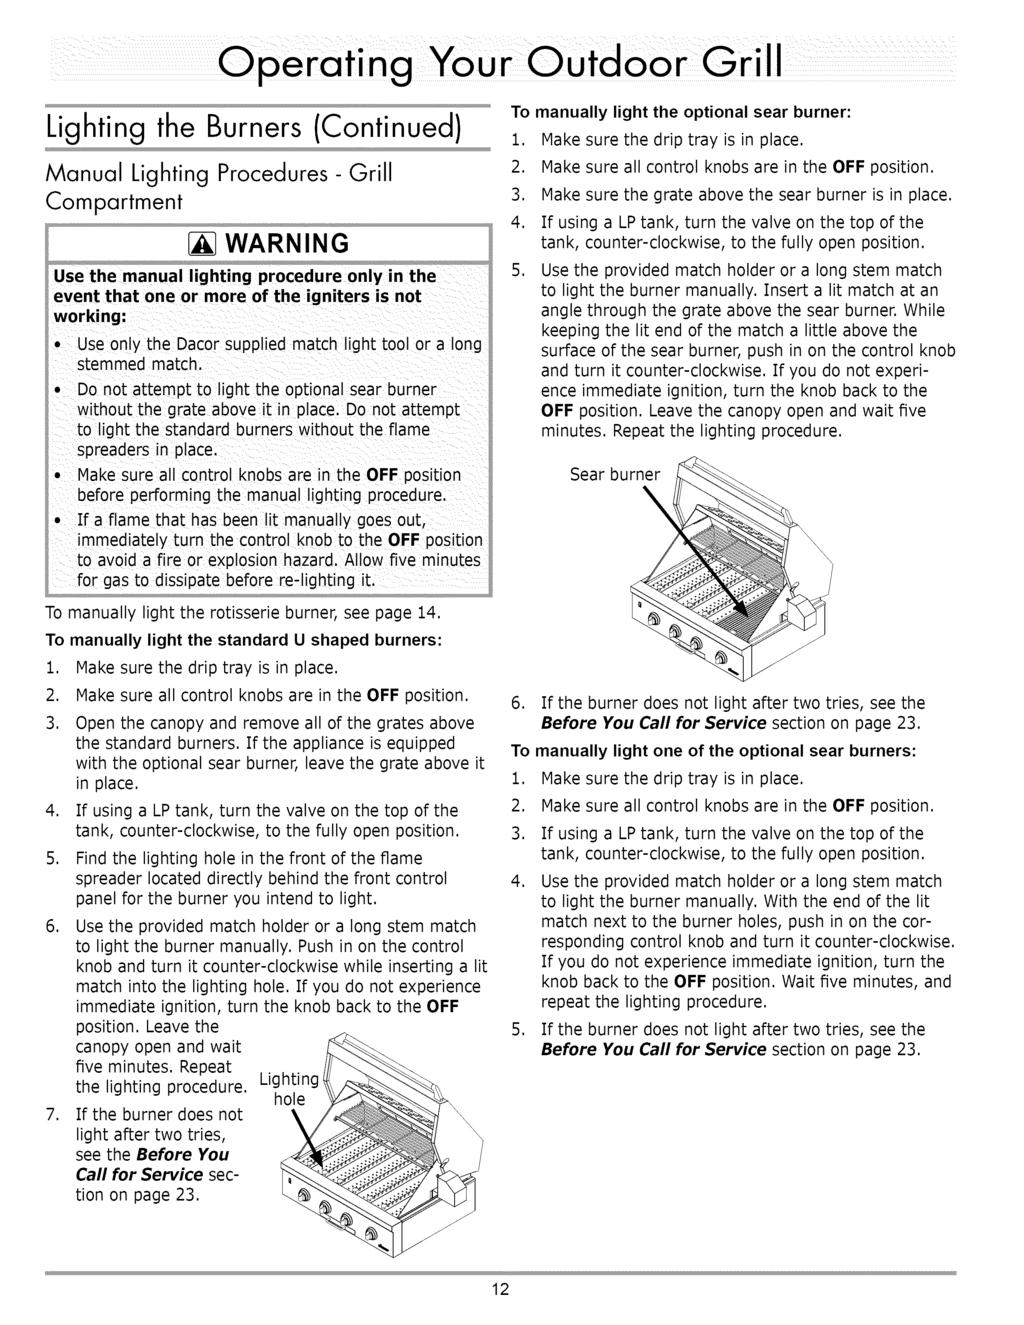 Lighting the Burners (Continued) Manual Lighting Procedures-Grill Compartment Use the manual lighting procedure only in the event that one or more of the igniters is not working: Use only the Dacor